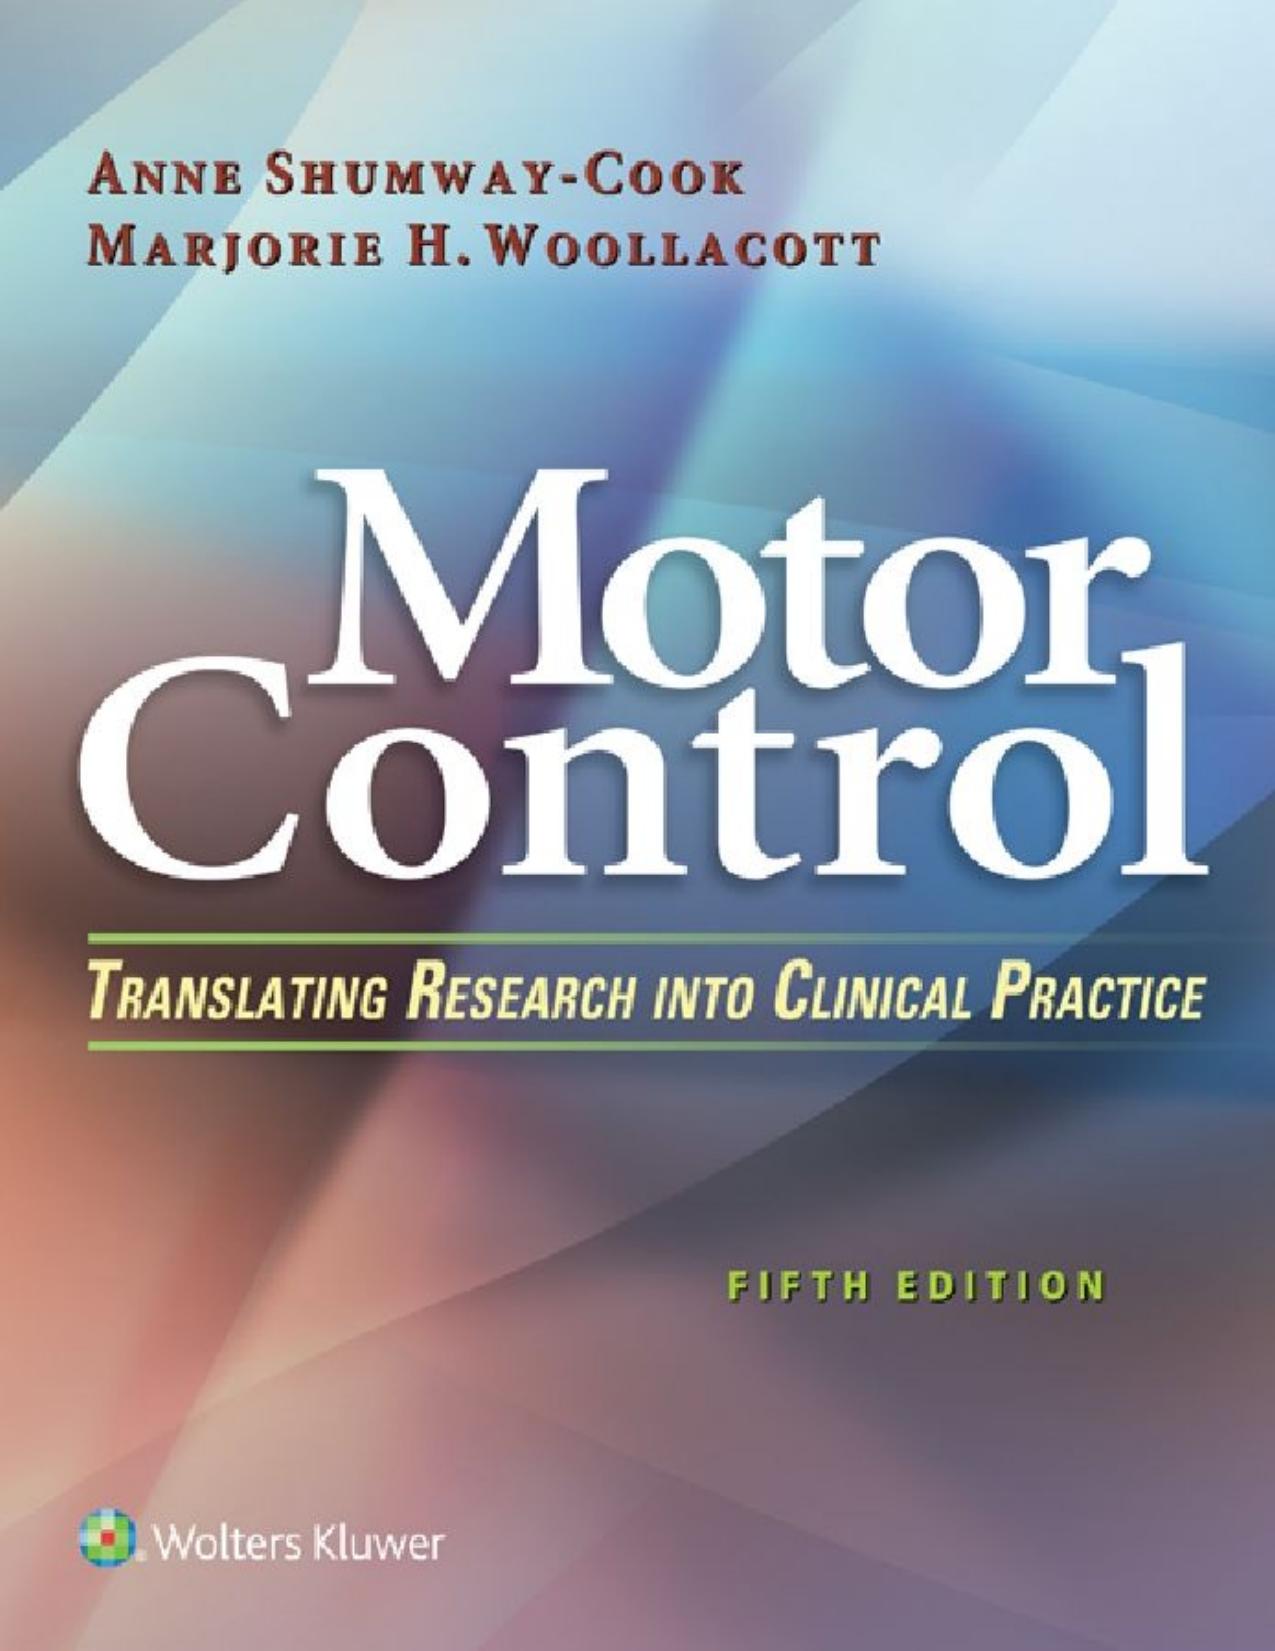 (eBook PDF)Motor Control: Translating Research into Clinical Practice 5th Edition by Anne Shumway-Cook,Marjorie H. Woollacott